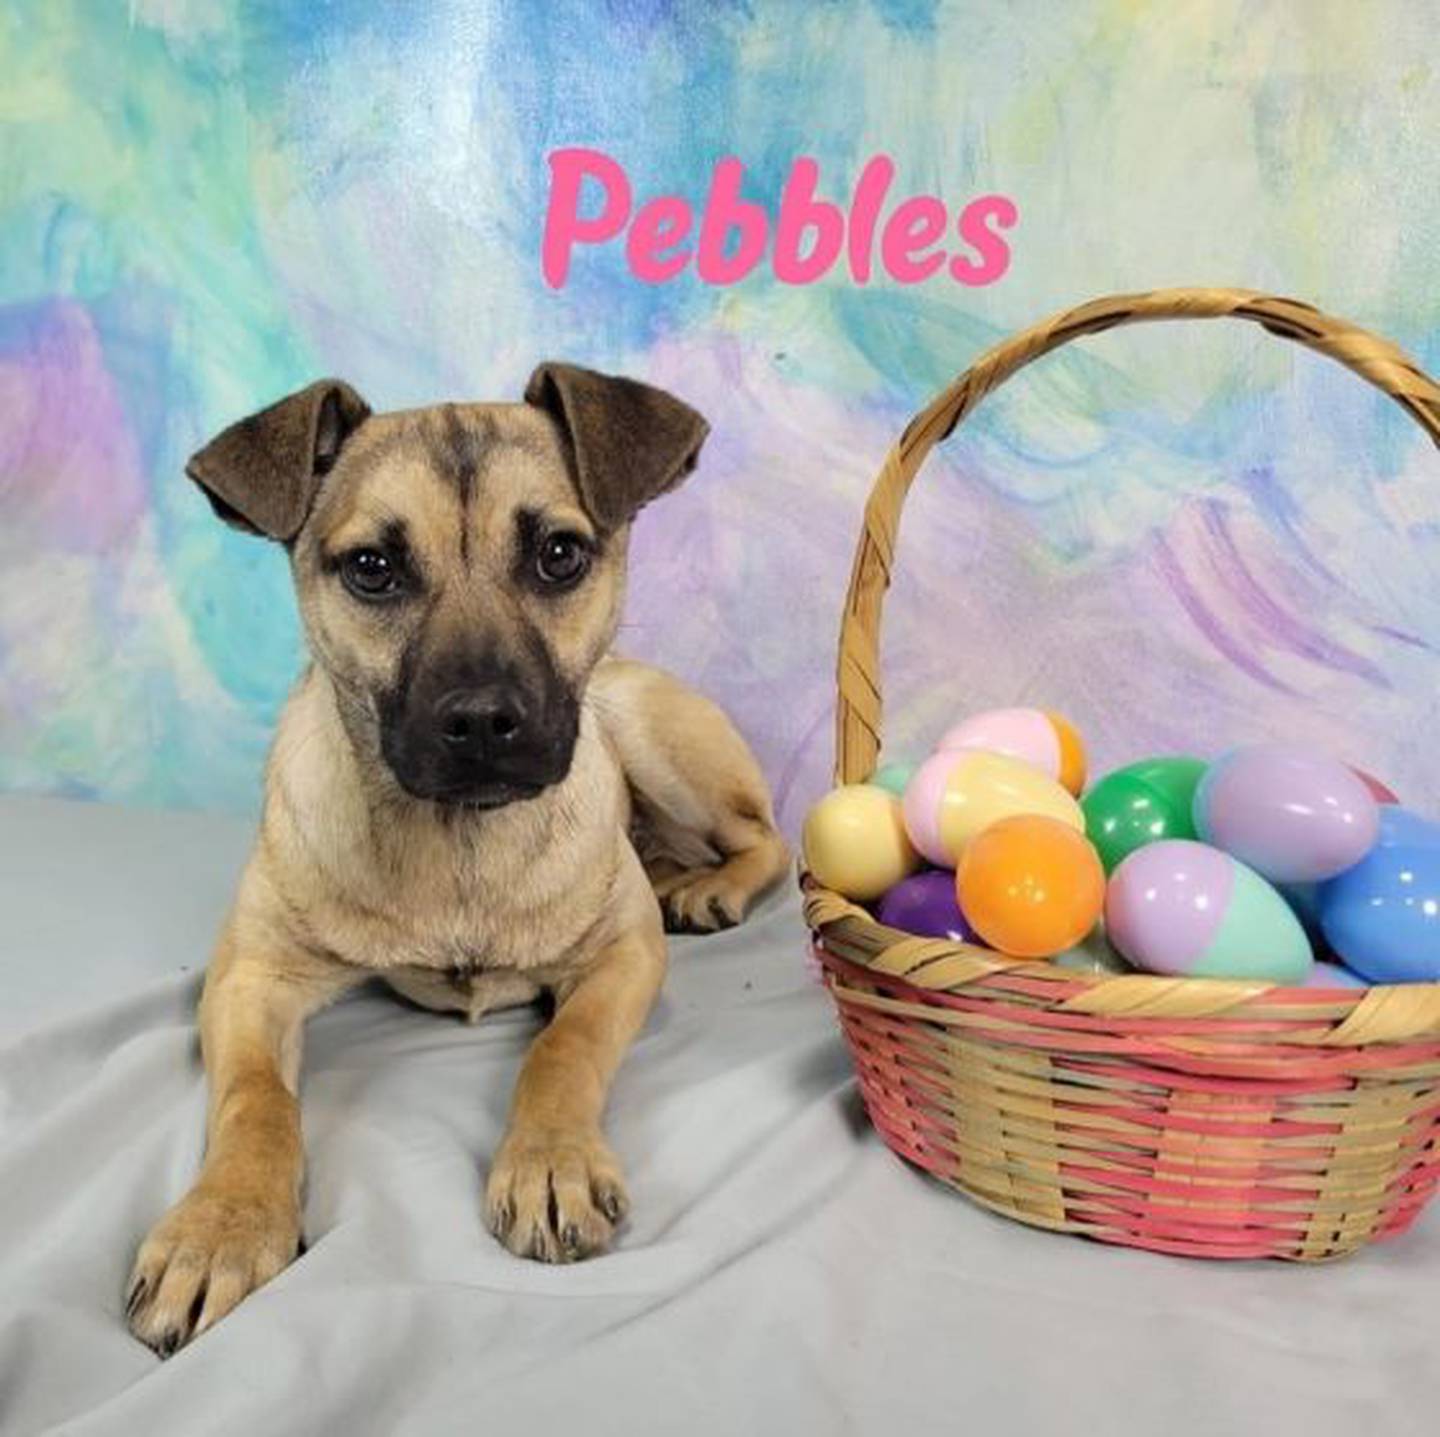 Pebbles is a sweet and shy. She is 18 months old and weighs 18 pounds. She plays well with others. To meet Pebbles, contact Hopeful Tails Animal Rescue at hopefultailsadoptions@outlook.com. Visit hopefultailsanimalrescue.org.